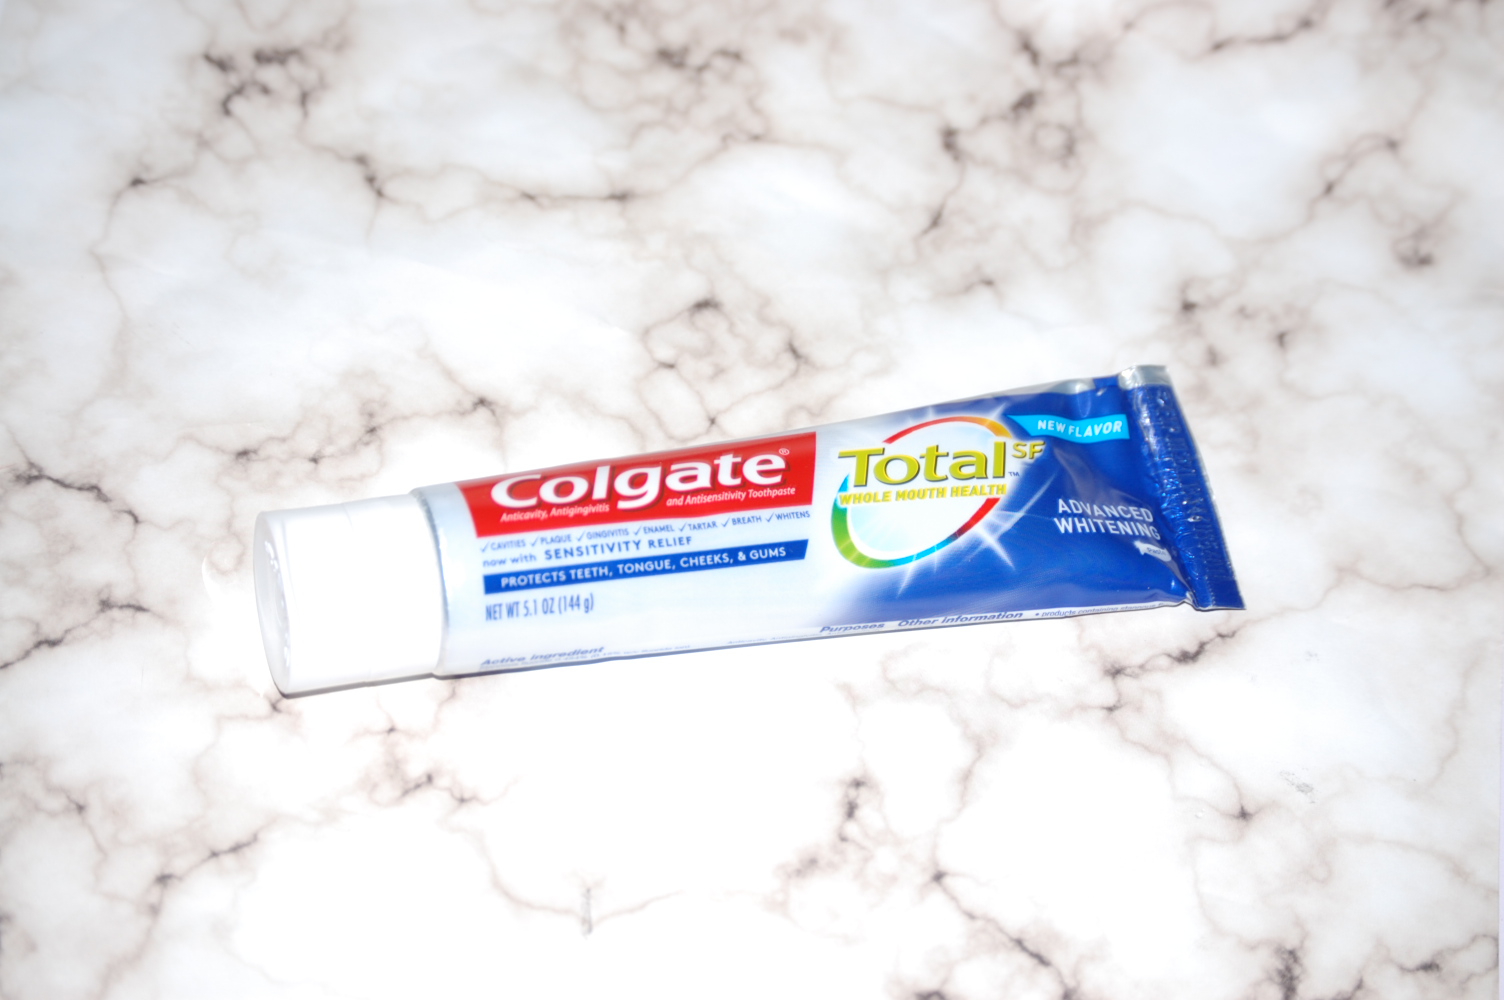 One topic that I don’t think is discussed enough when it comes to health and wellness is the health of your mouth. Using a high-quality toothpaste like Colgate TotalSF Advanced Whitening Toothpaste not only makes your mouth healthier but may also help improve your overall health.